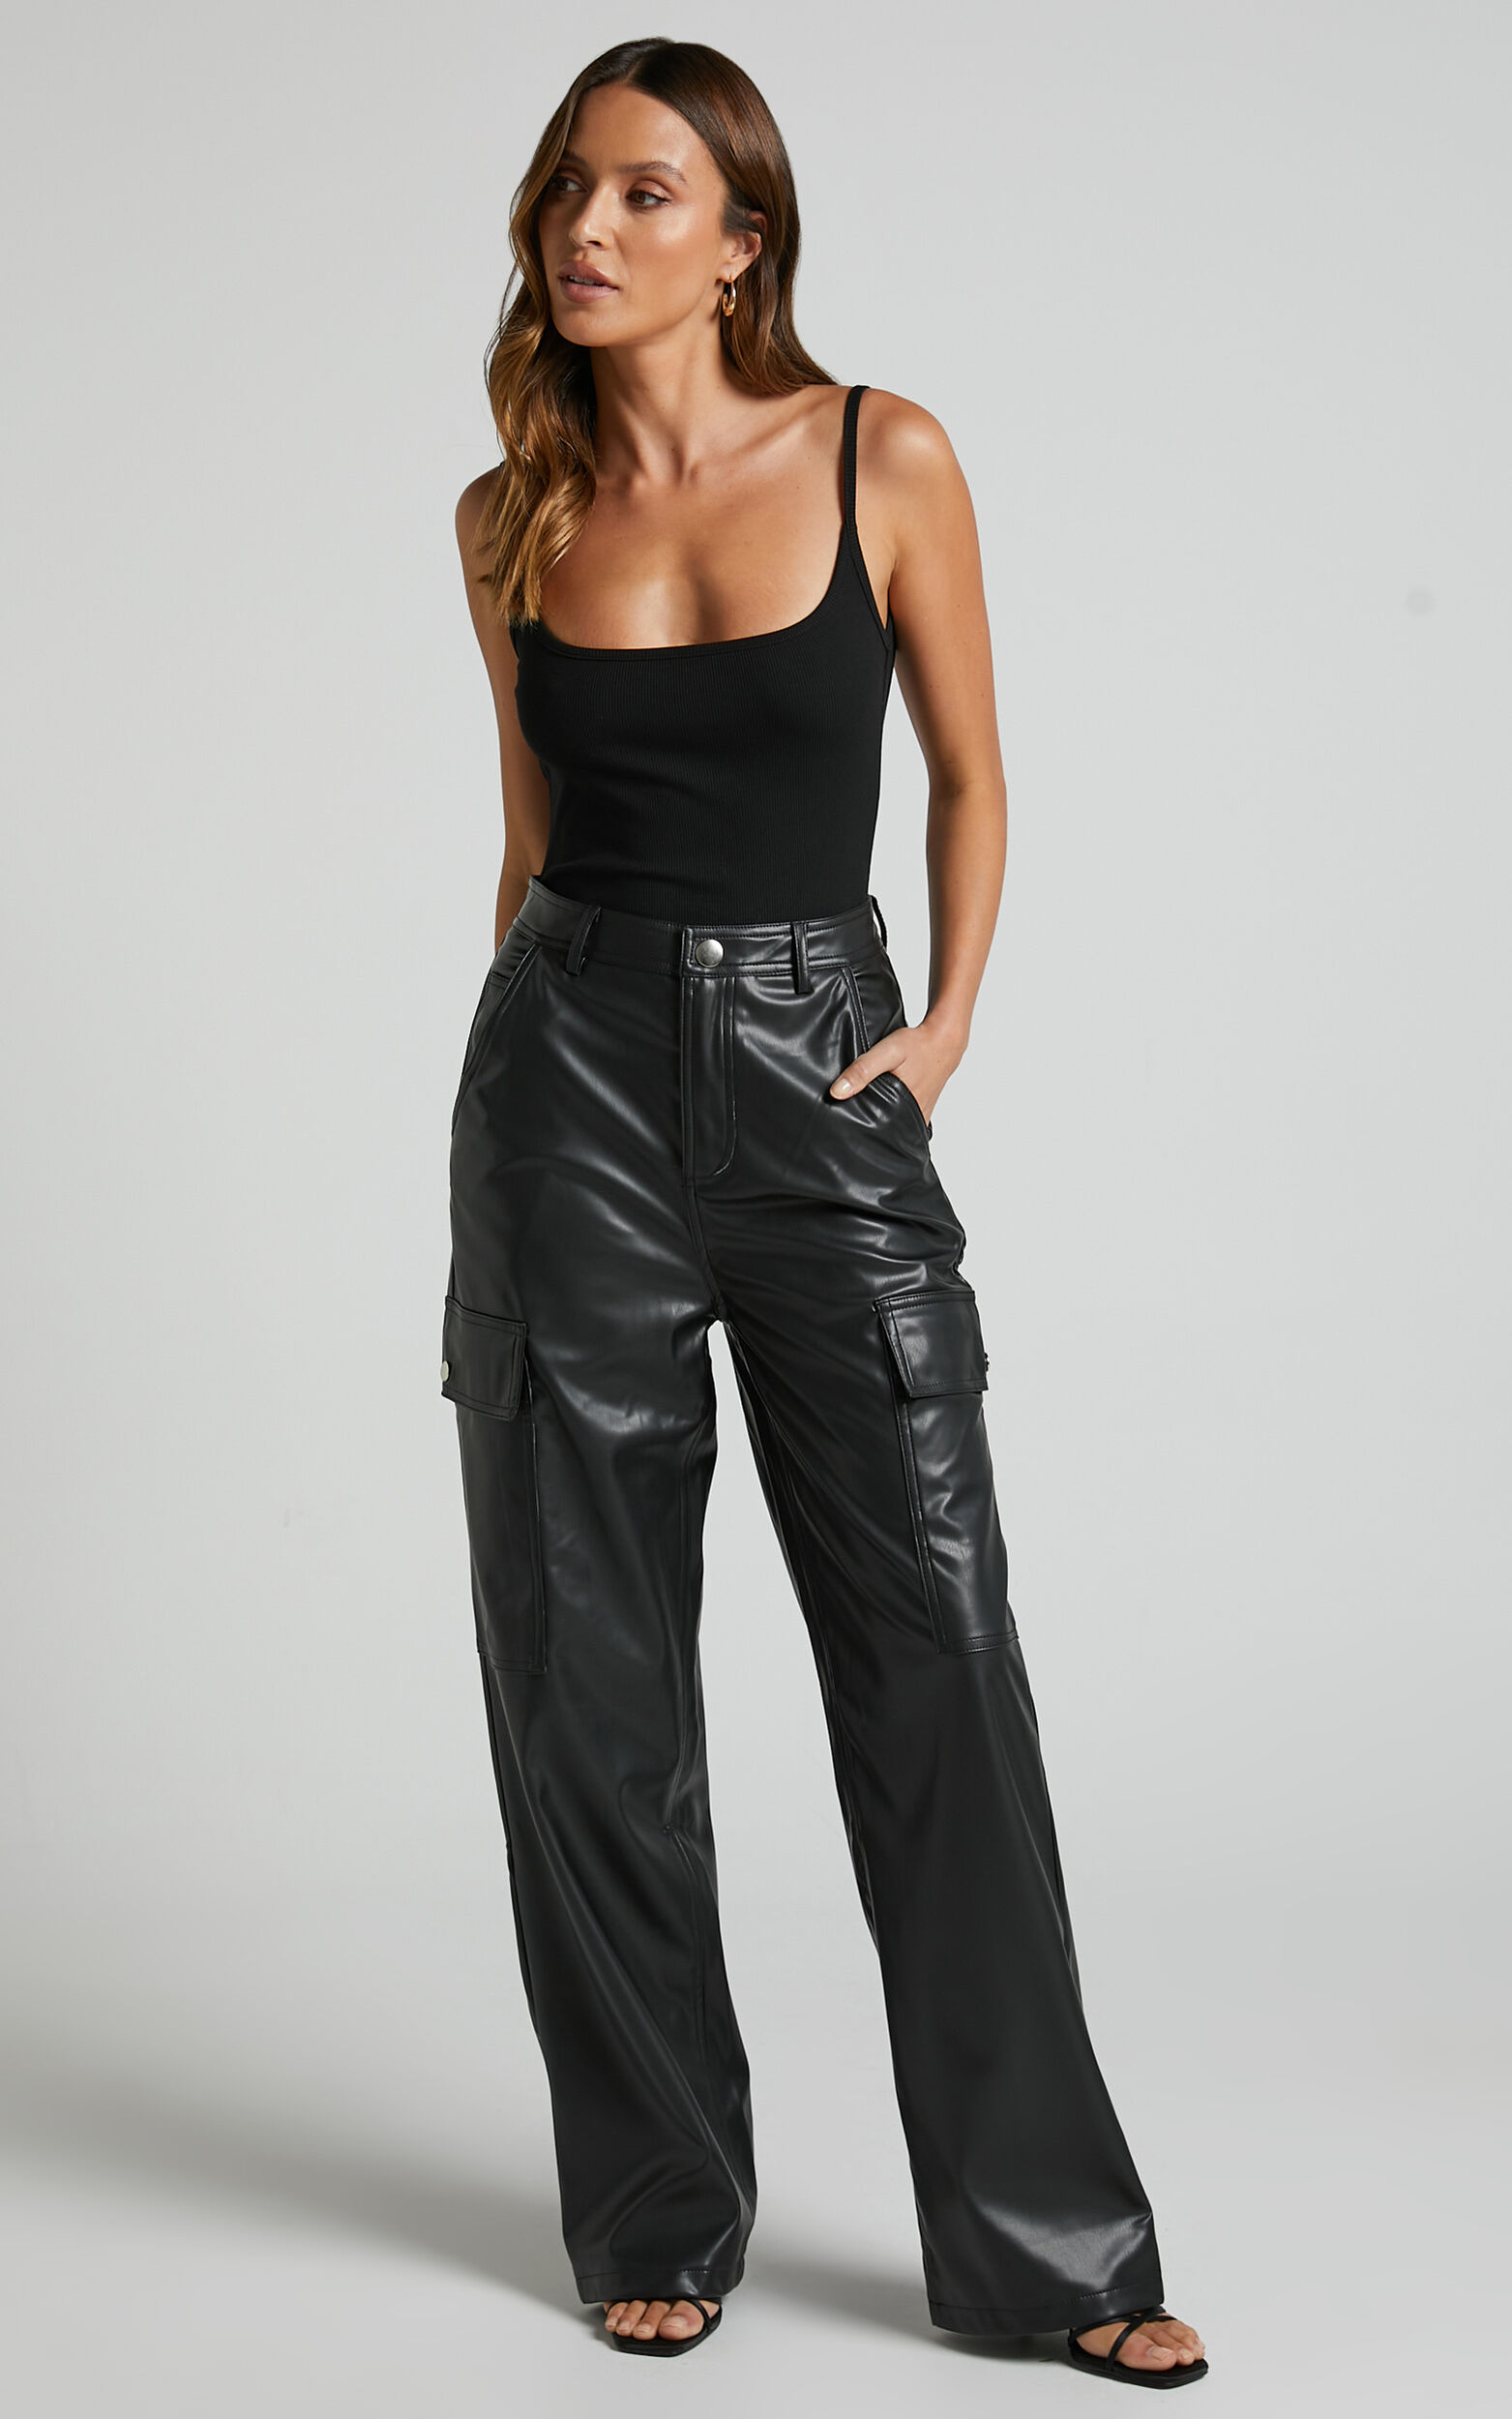 TopShop Leather Casual Pants for Women